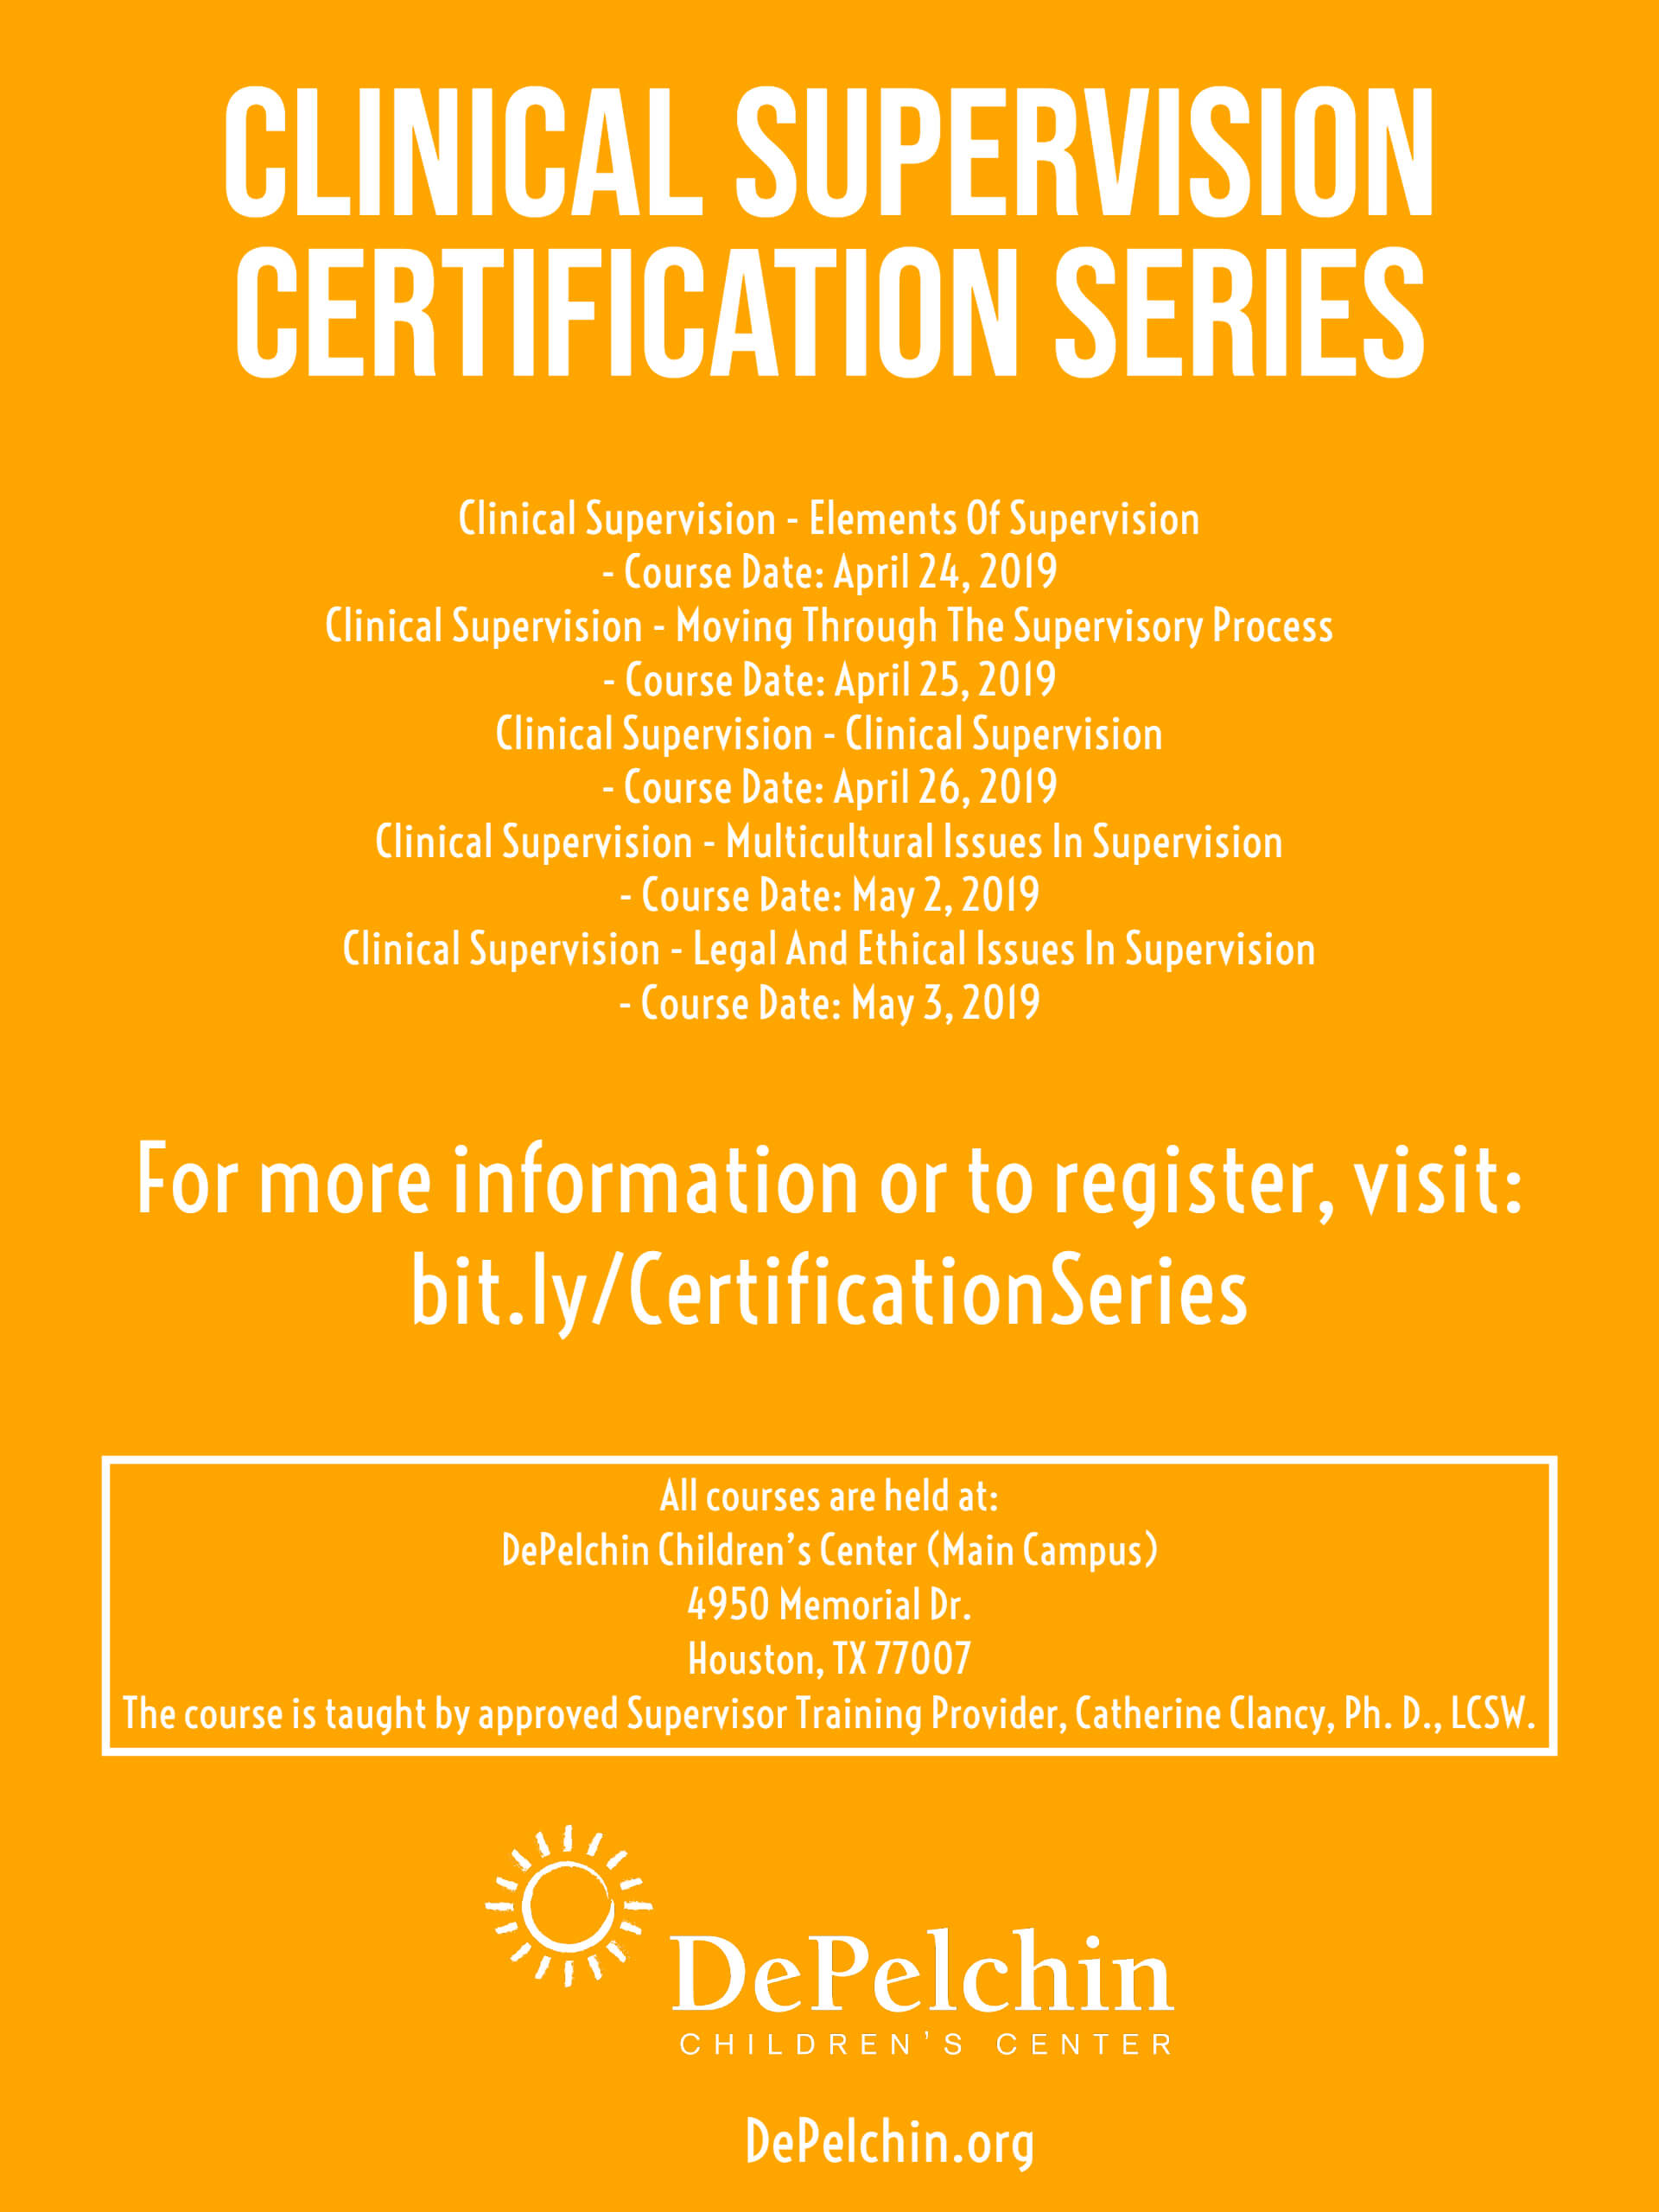 Clinical Supervision Certification Series - TMC News